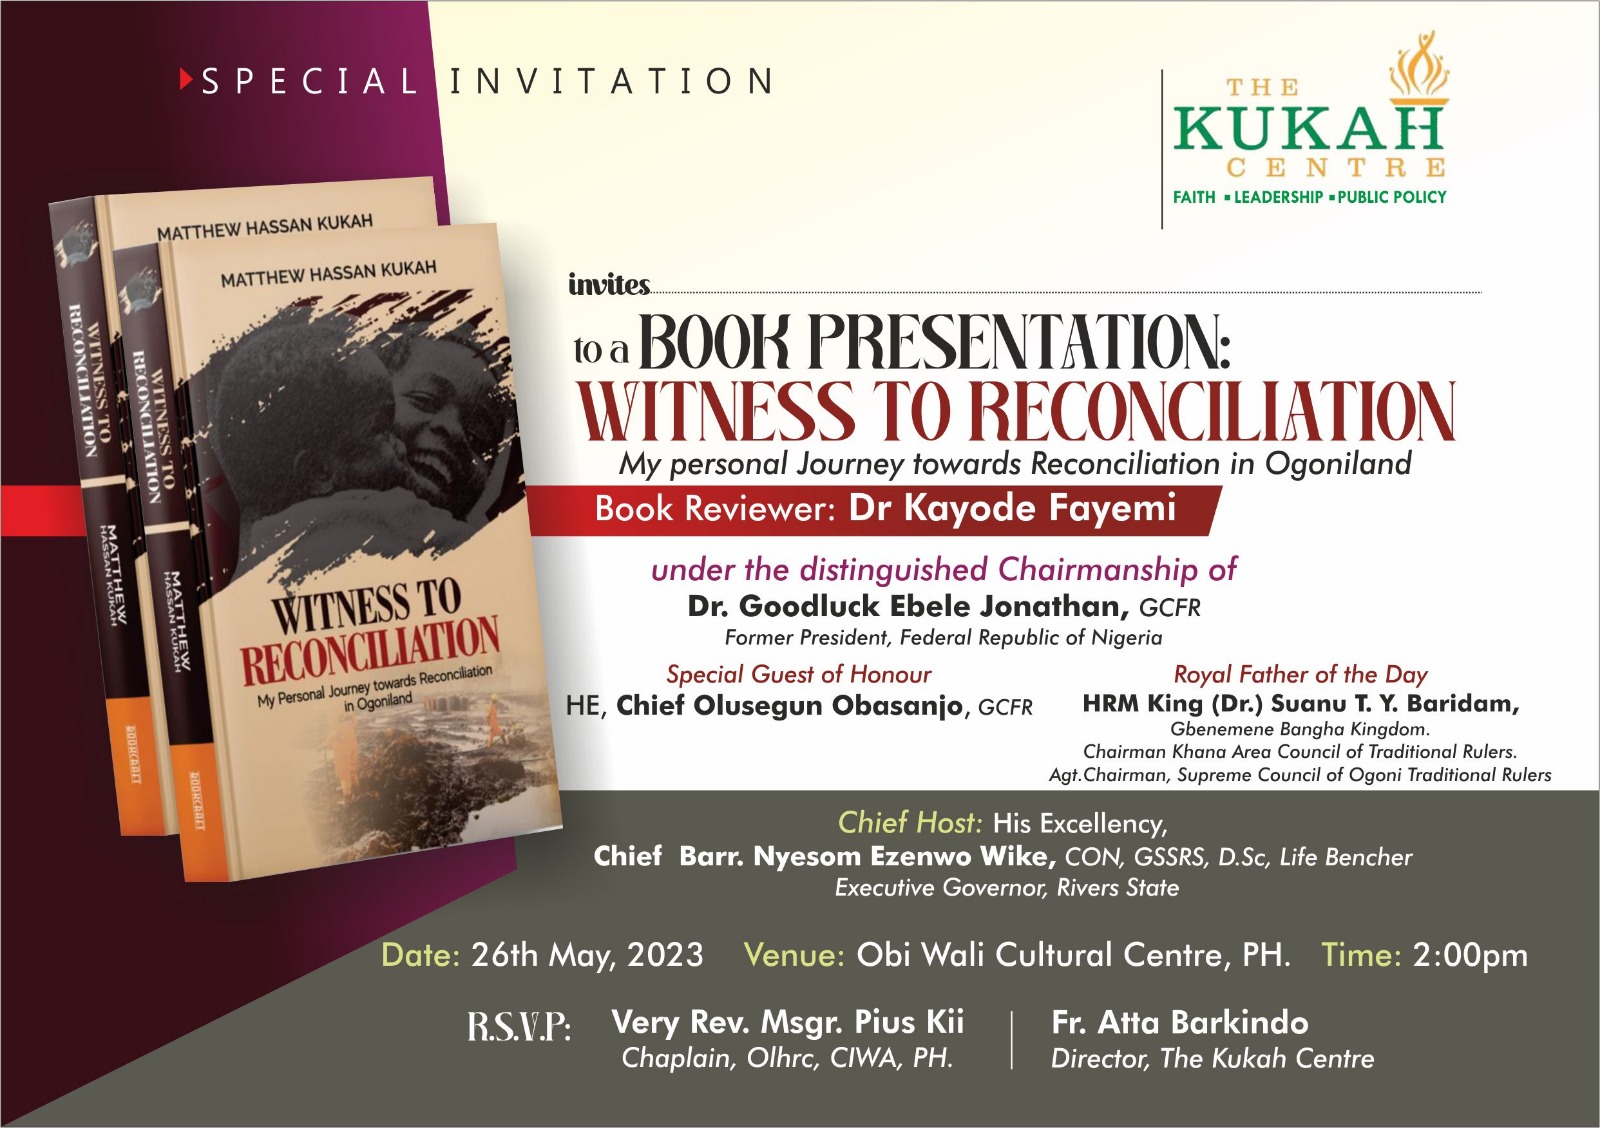 Witness to Reconciliation: My Personal Journey Towards Reconciliation in Ogoniland by Mathew Kukah